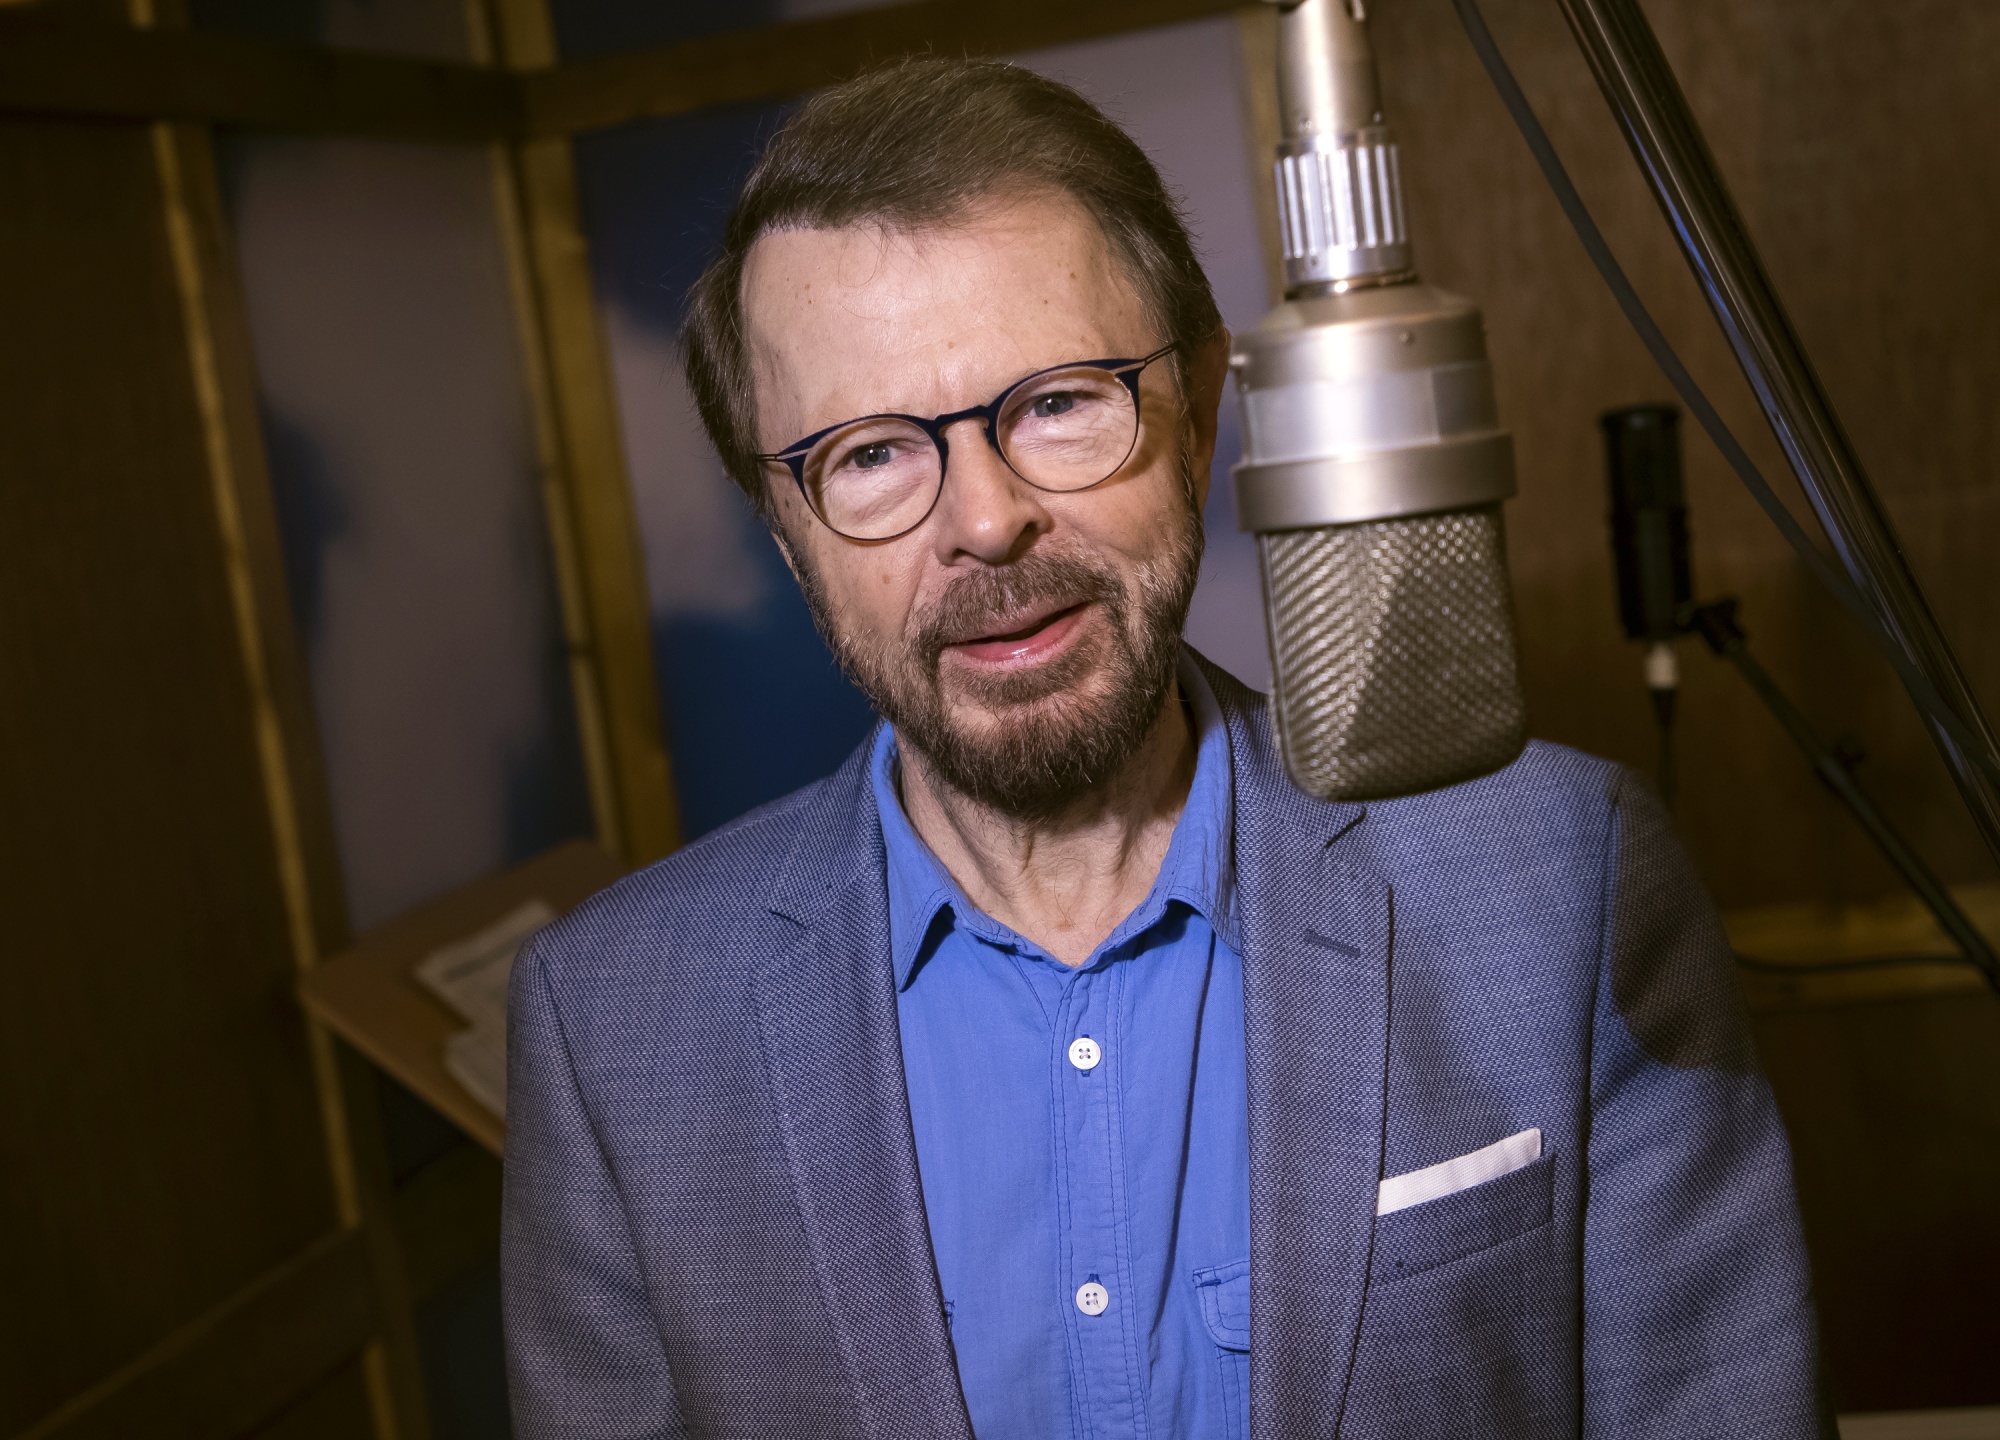 Bjorn Ulvaeus, of ABBA, poses for photographers in a recreation of the Swedish recording studio Polar on Dec. 13, 2017, in London. Ulvaeus is launching a radio show on Apple Music. The songwriter and guitarist will host the &quot;Björn from ABBA and Friends' Radio Show&quot; on Apple Music Hits starting Monday, Jan. 24, 2022. (Photo by Vianney Le Caer/Invision/AP, File)